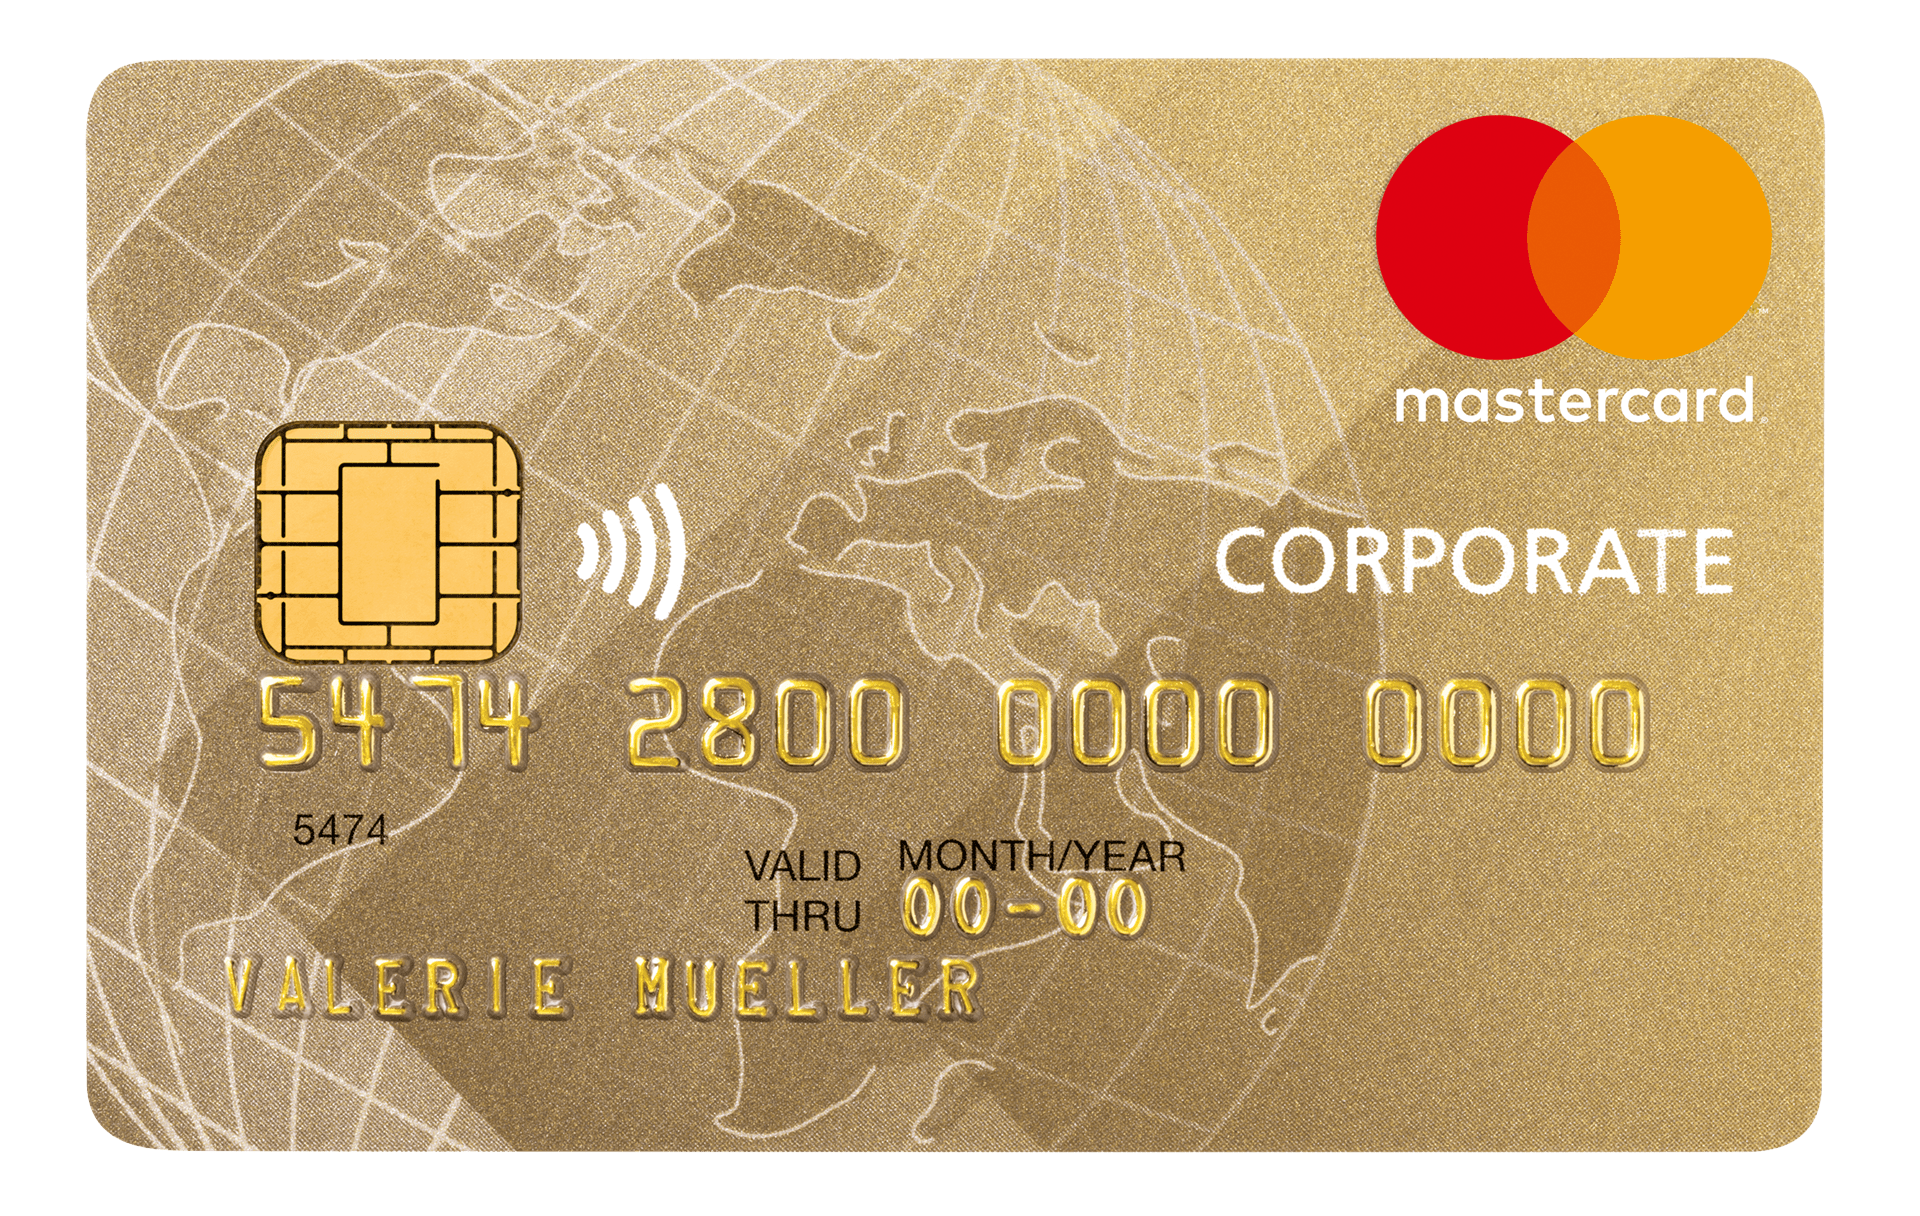 Mastercard Corporate Card Gold